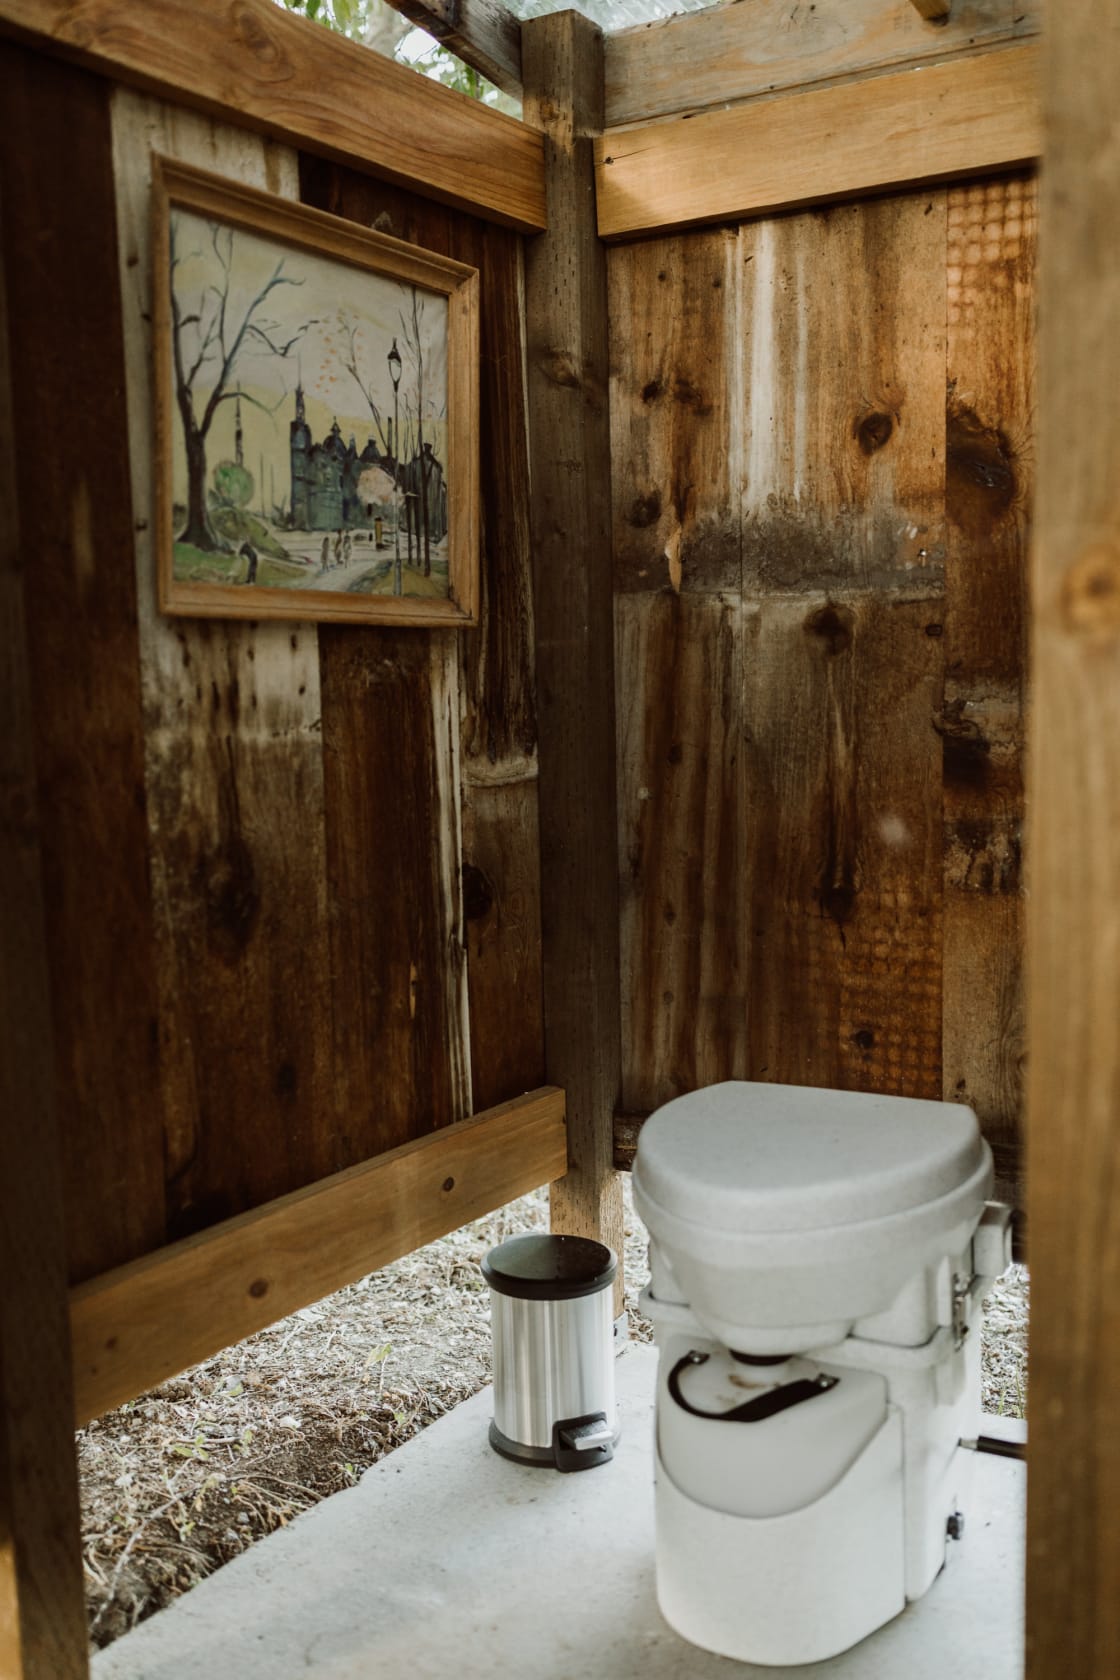 Nature's Head compost toilet is super easy to use and the art inside makes it feel homey!